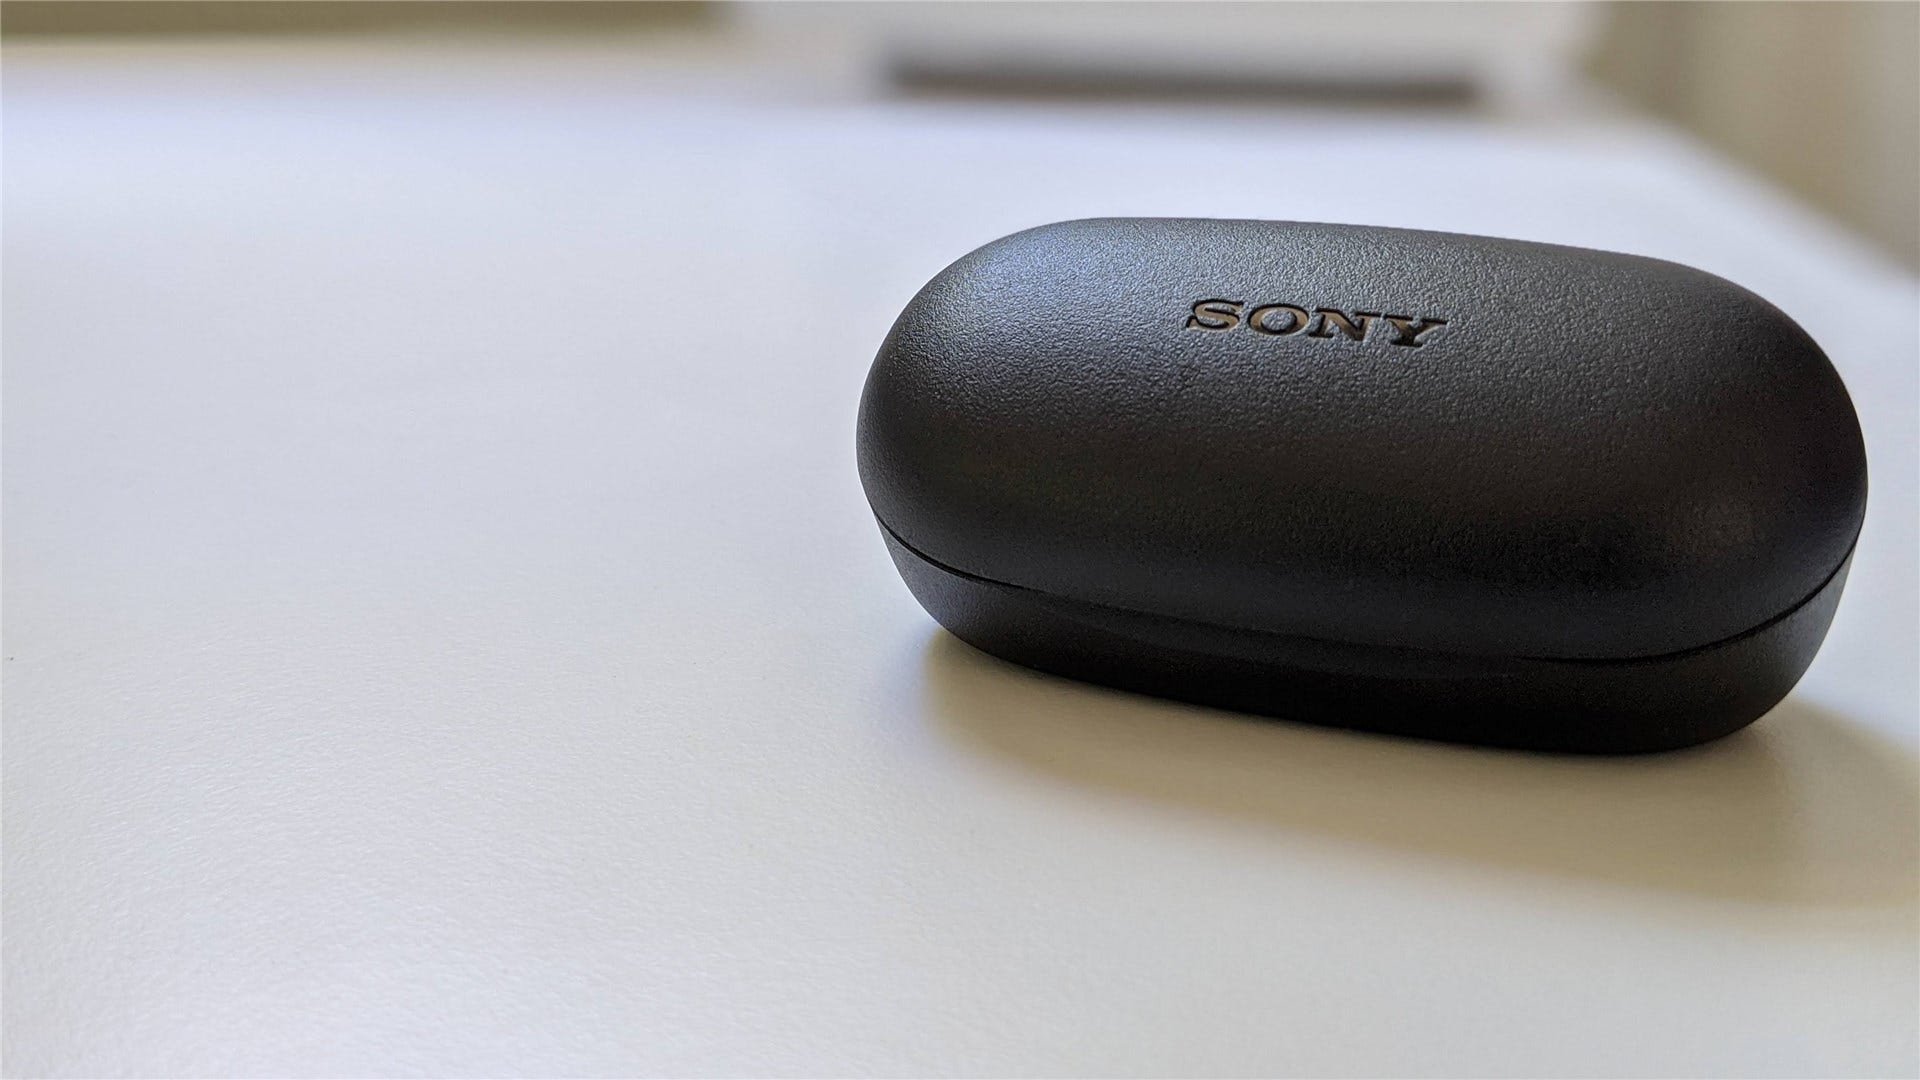 Sony’s Upcoming WF-1000XM4 Earbuds Leak, Showing More Modern Design